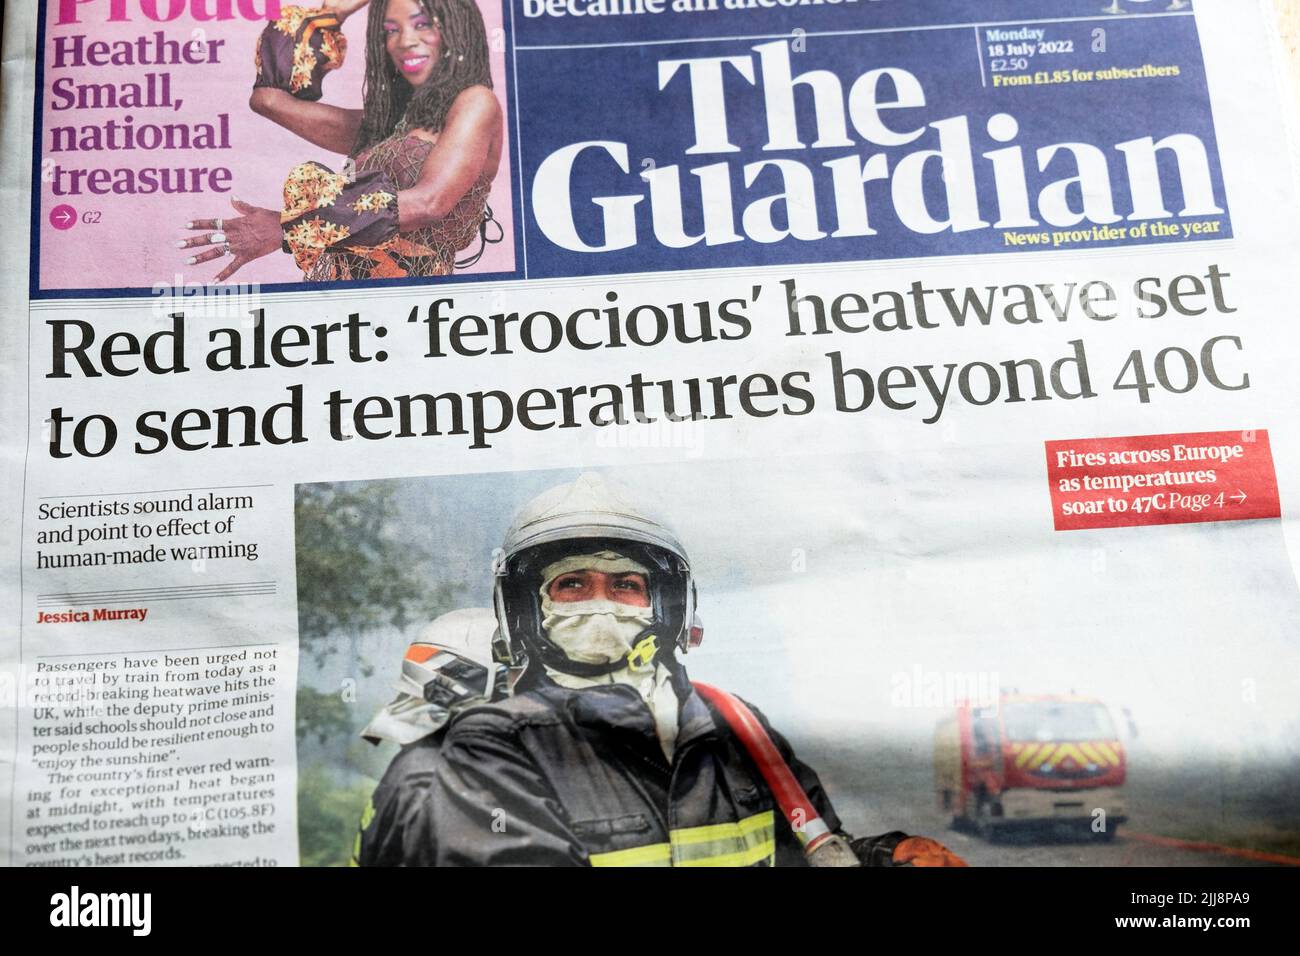 'Red alert: 'ferocious' heatwave set to send temperatures beyond 40°C The Guardian front page newspaper headline 18 July 2022 London UK Stock Photo